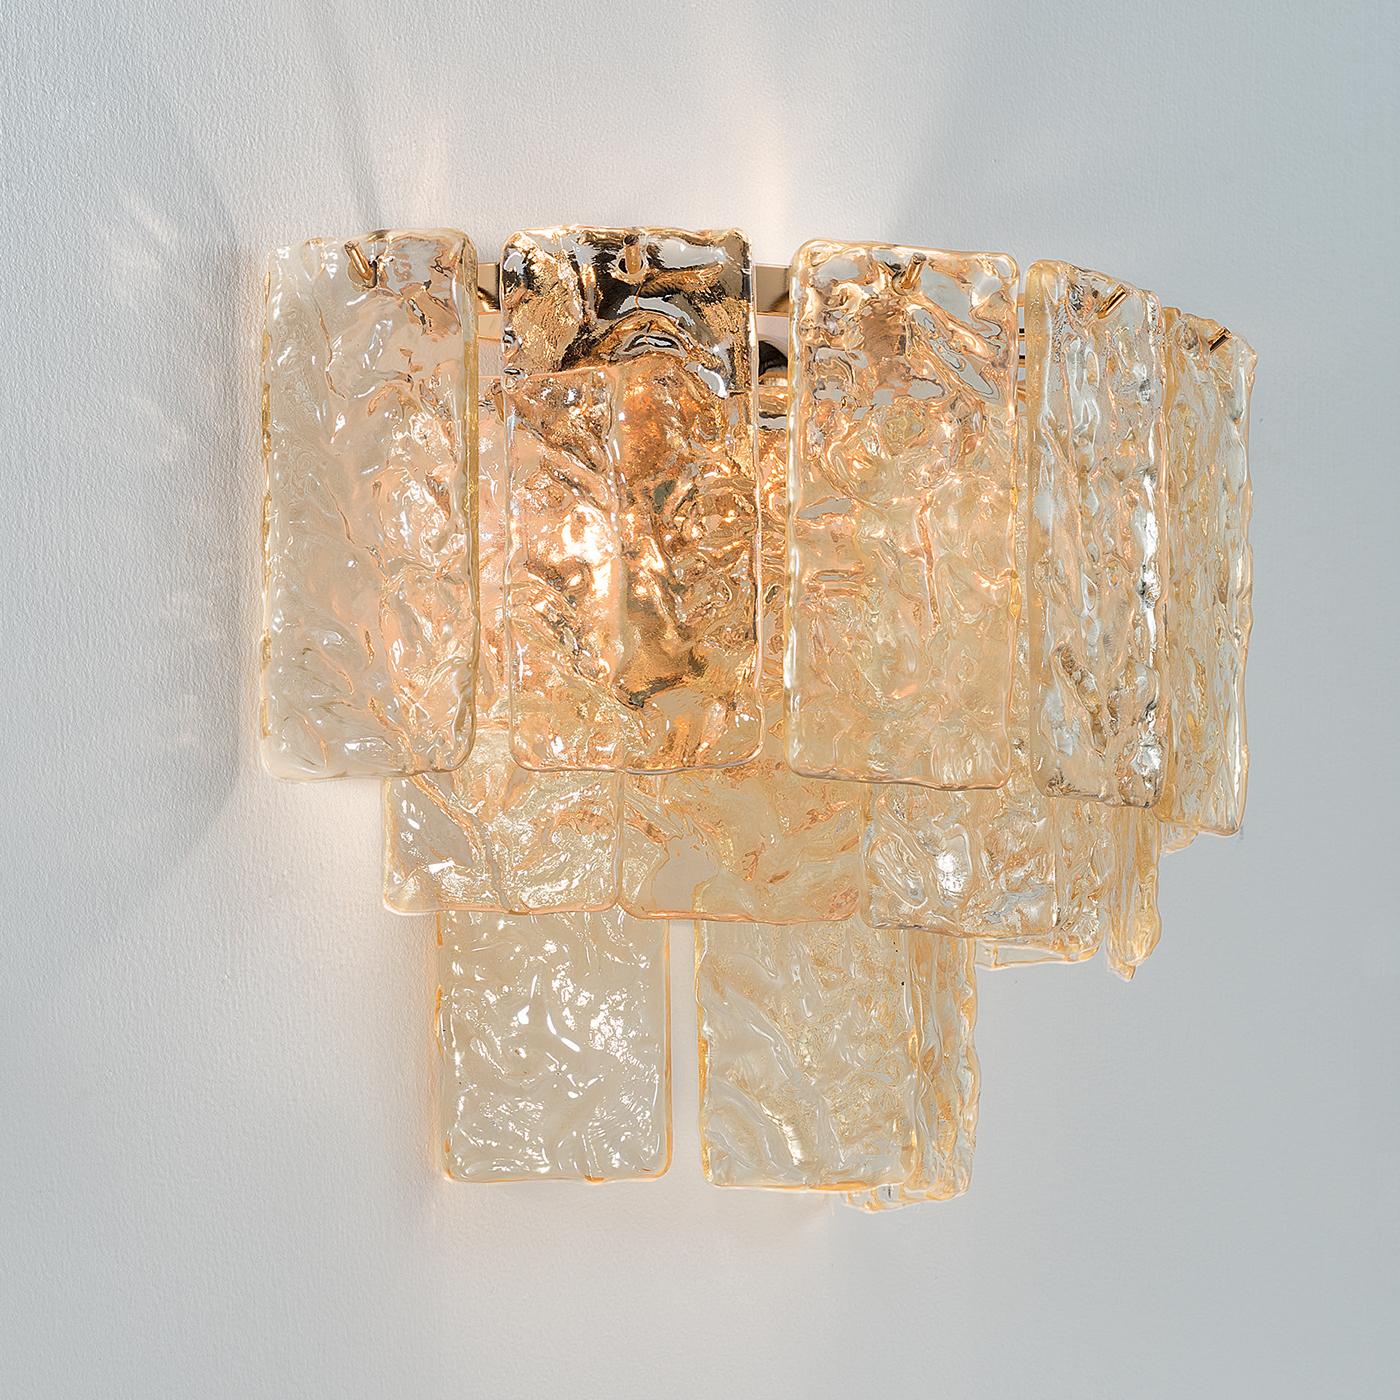 With a spectacular design featuring multiple rectangles of colored hammered glass, this stylish Wall Lamp brings an element of class and creativity to any modern style living space. With the structure finished in chrome or 24-karat gold, the